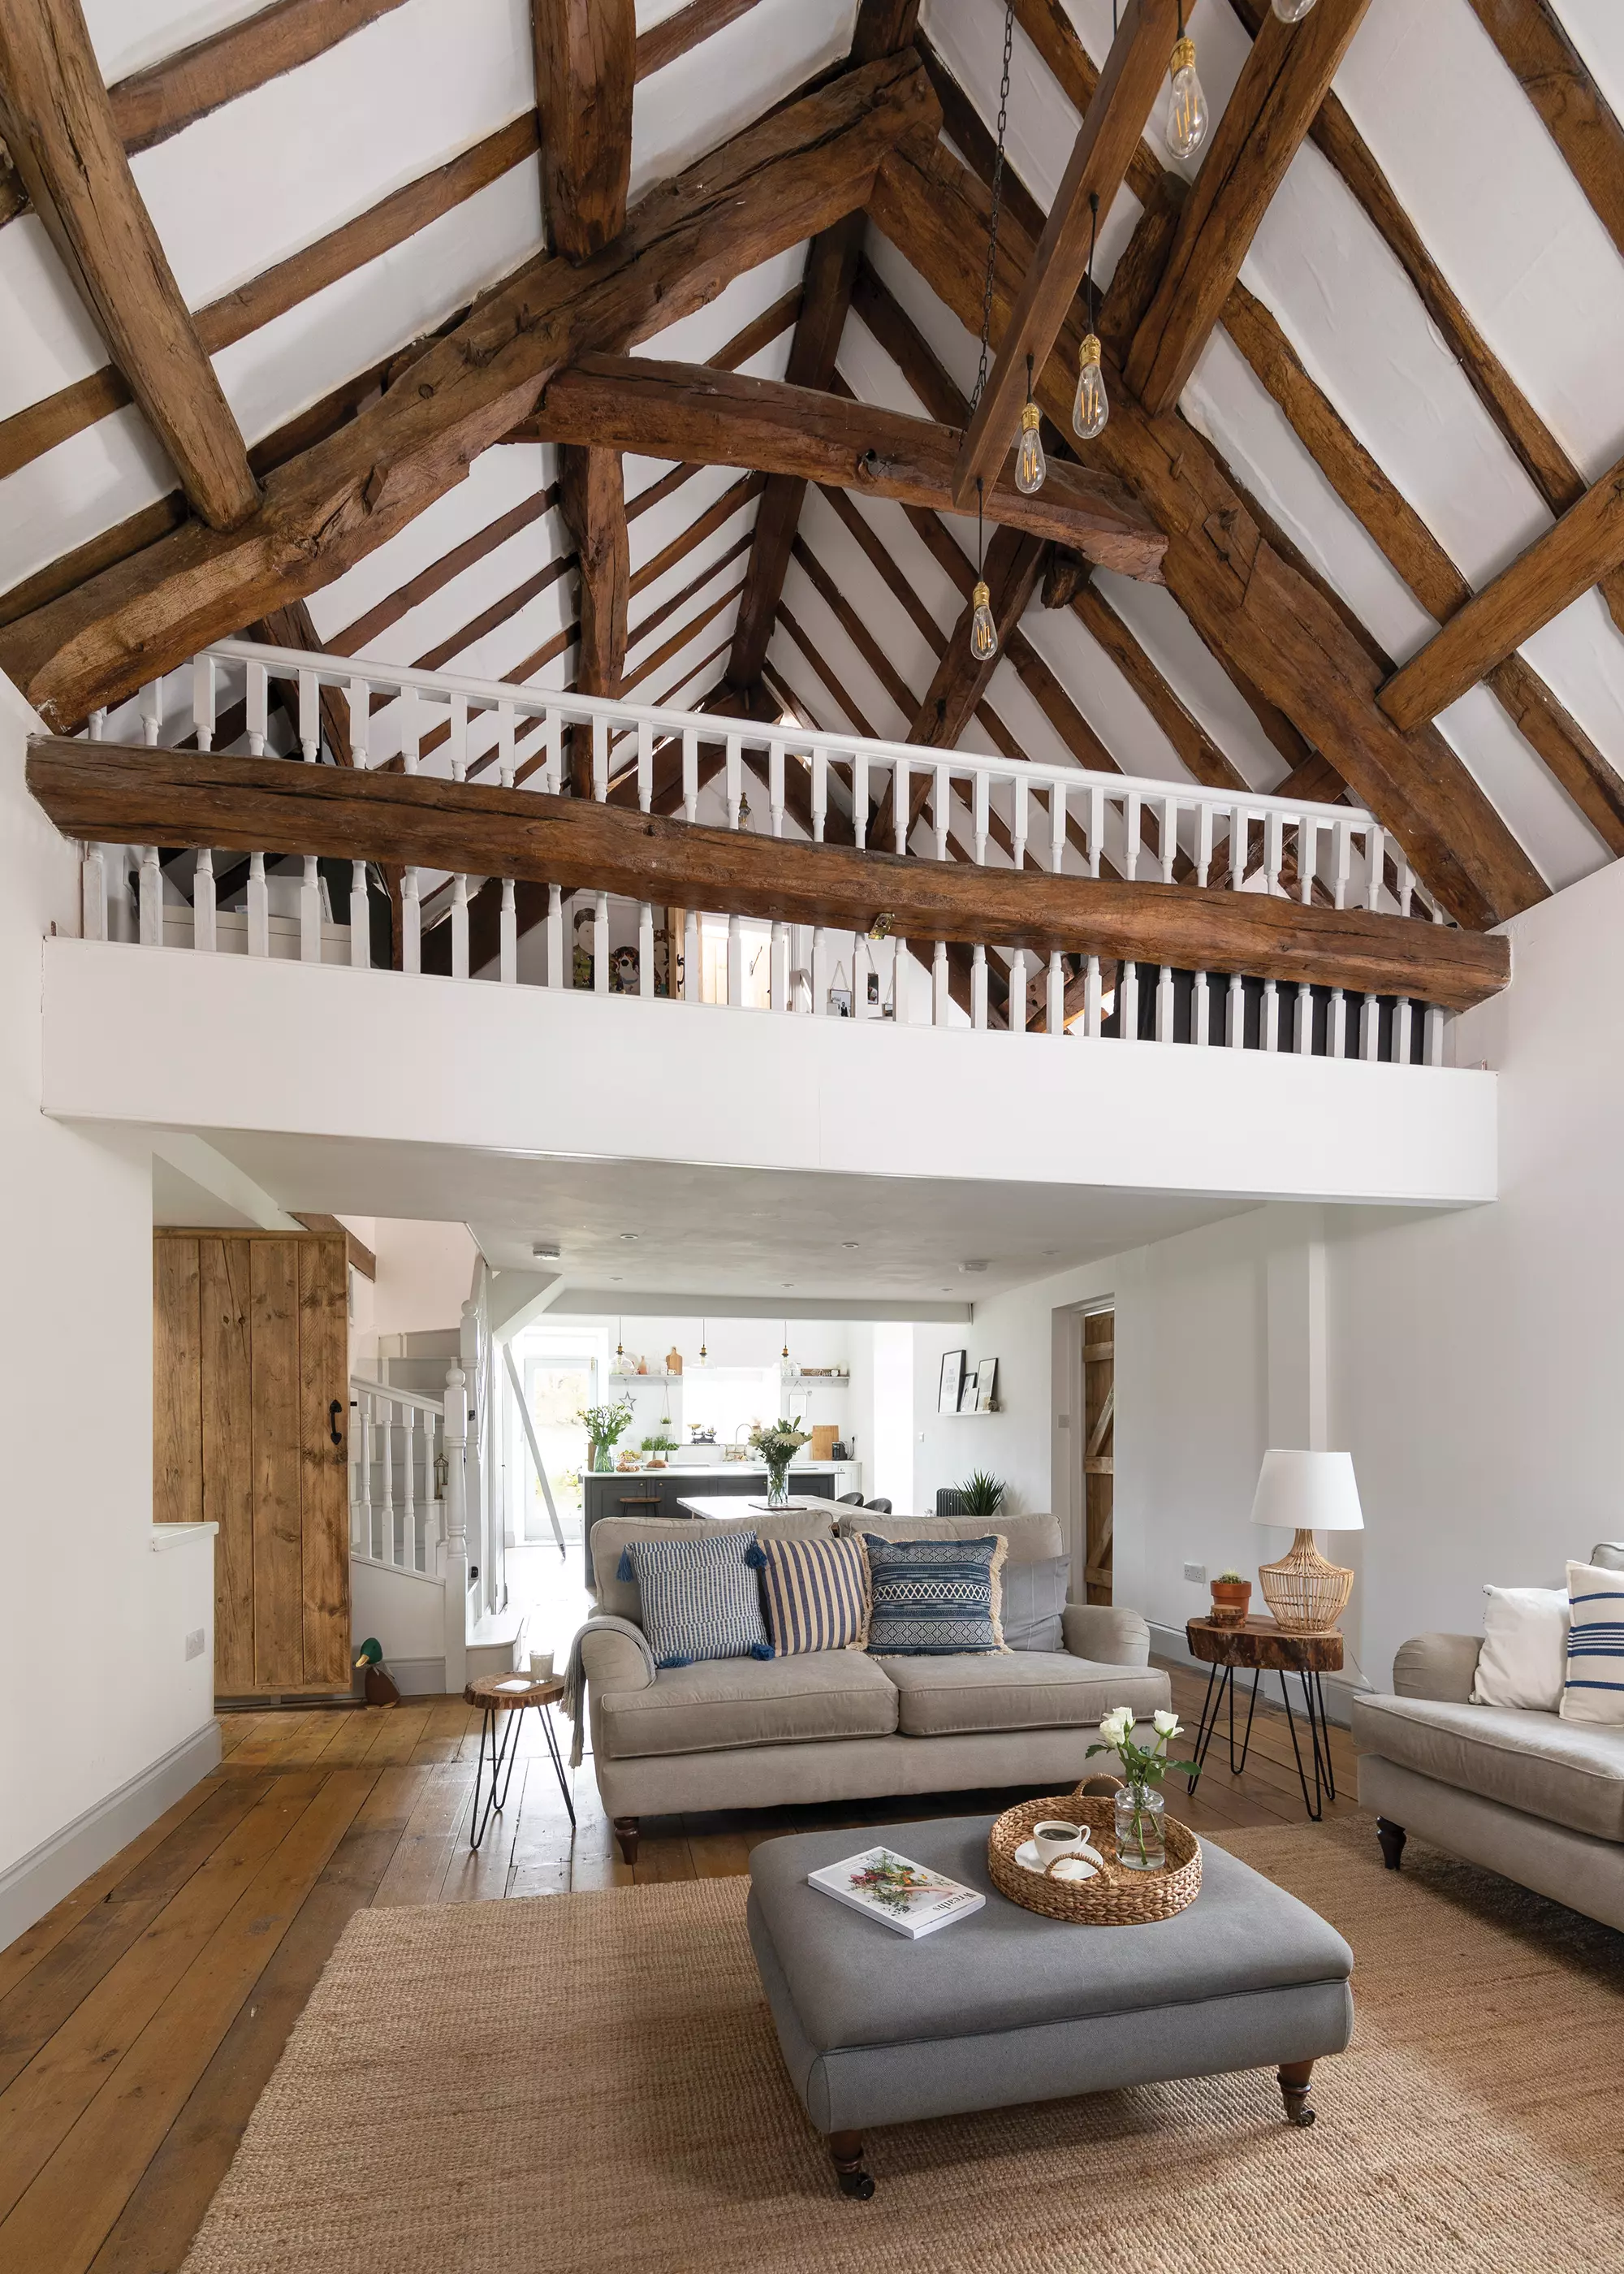 living room area with exposed beams and vaulted ceiling